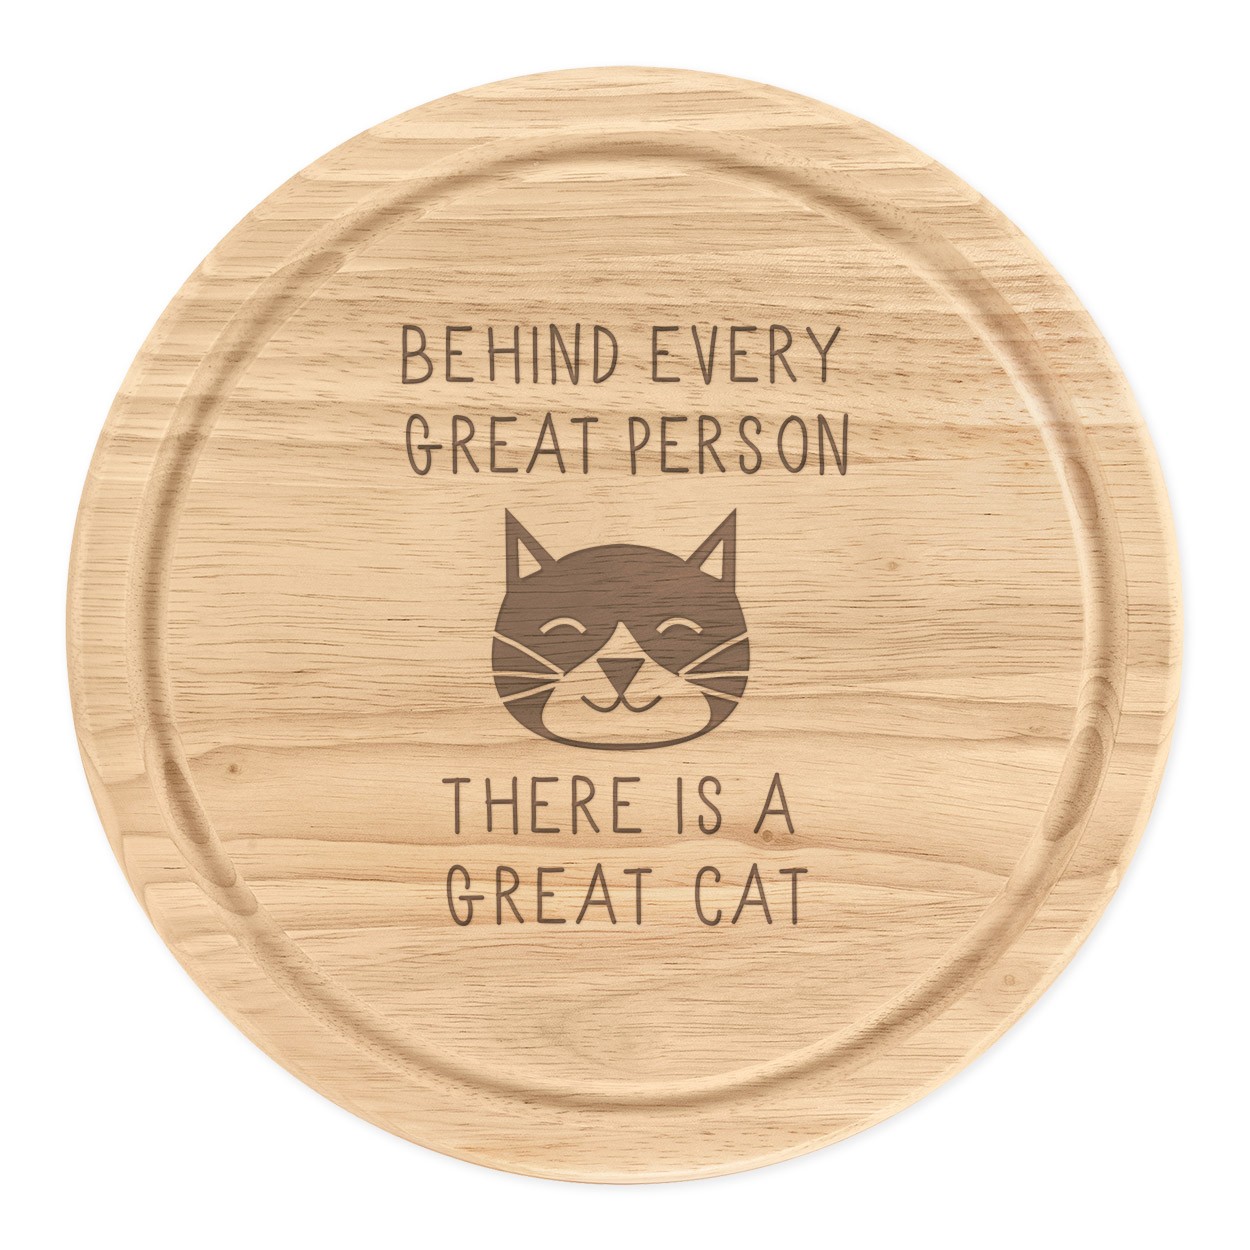 Behind Every Great Person Is A Great Cat Wooden Chopping Cheese Board Round 25cm